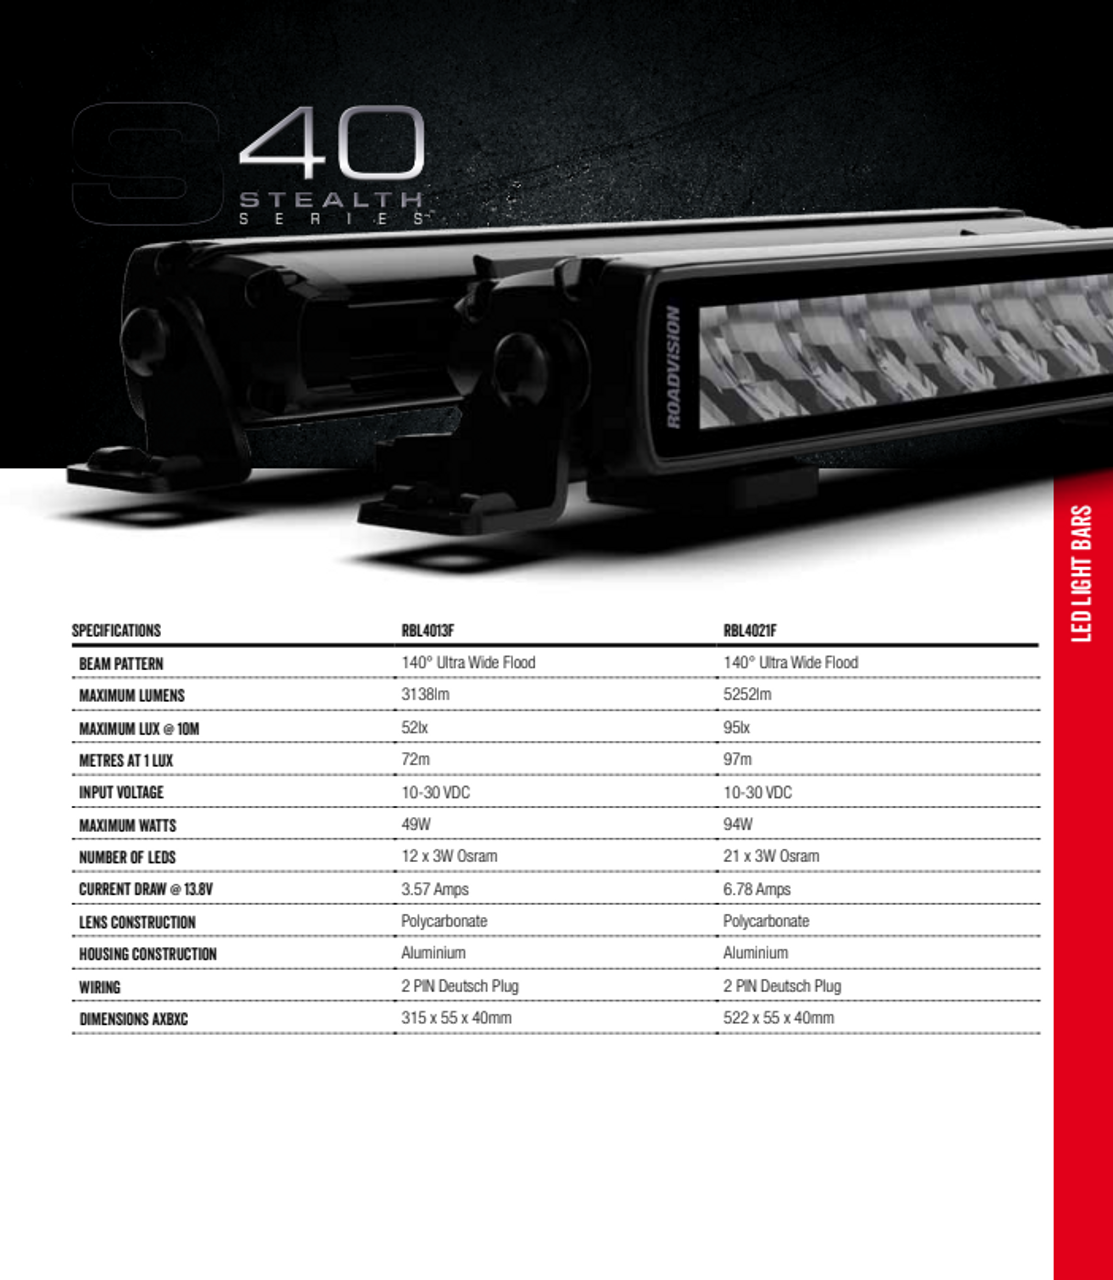 Stealth Light Bar 21 inch Flood Beam. Stealth Style and Look, Black Housing and Smoked Lens, S40 Series 10 to 30v DC 5252lm Thermal Management System. 7 Year Warranty.